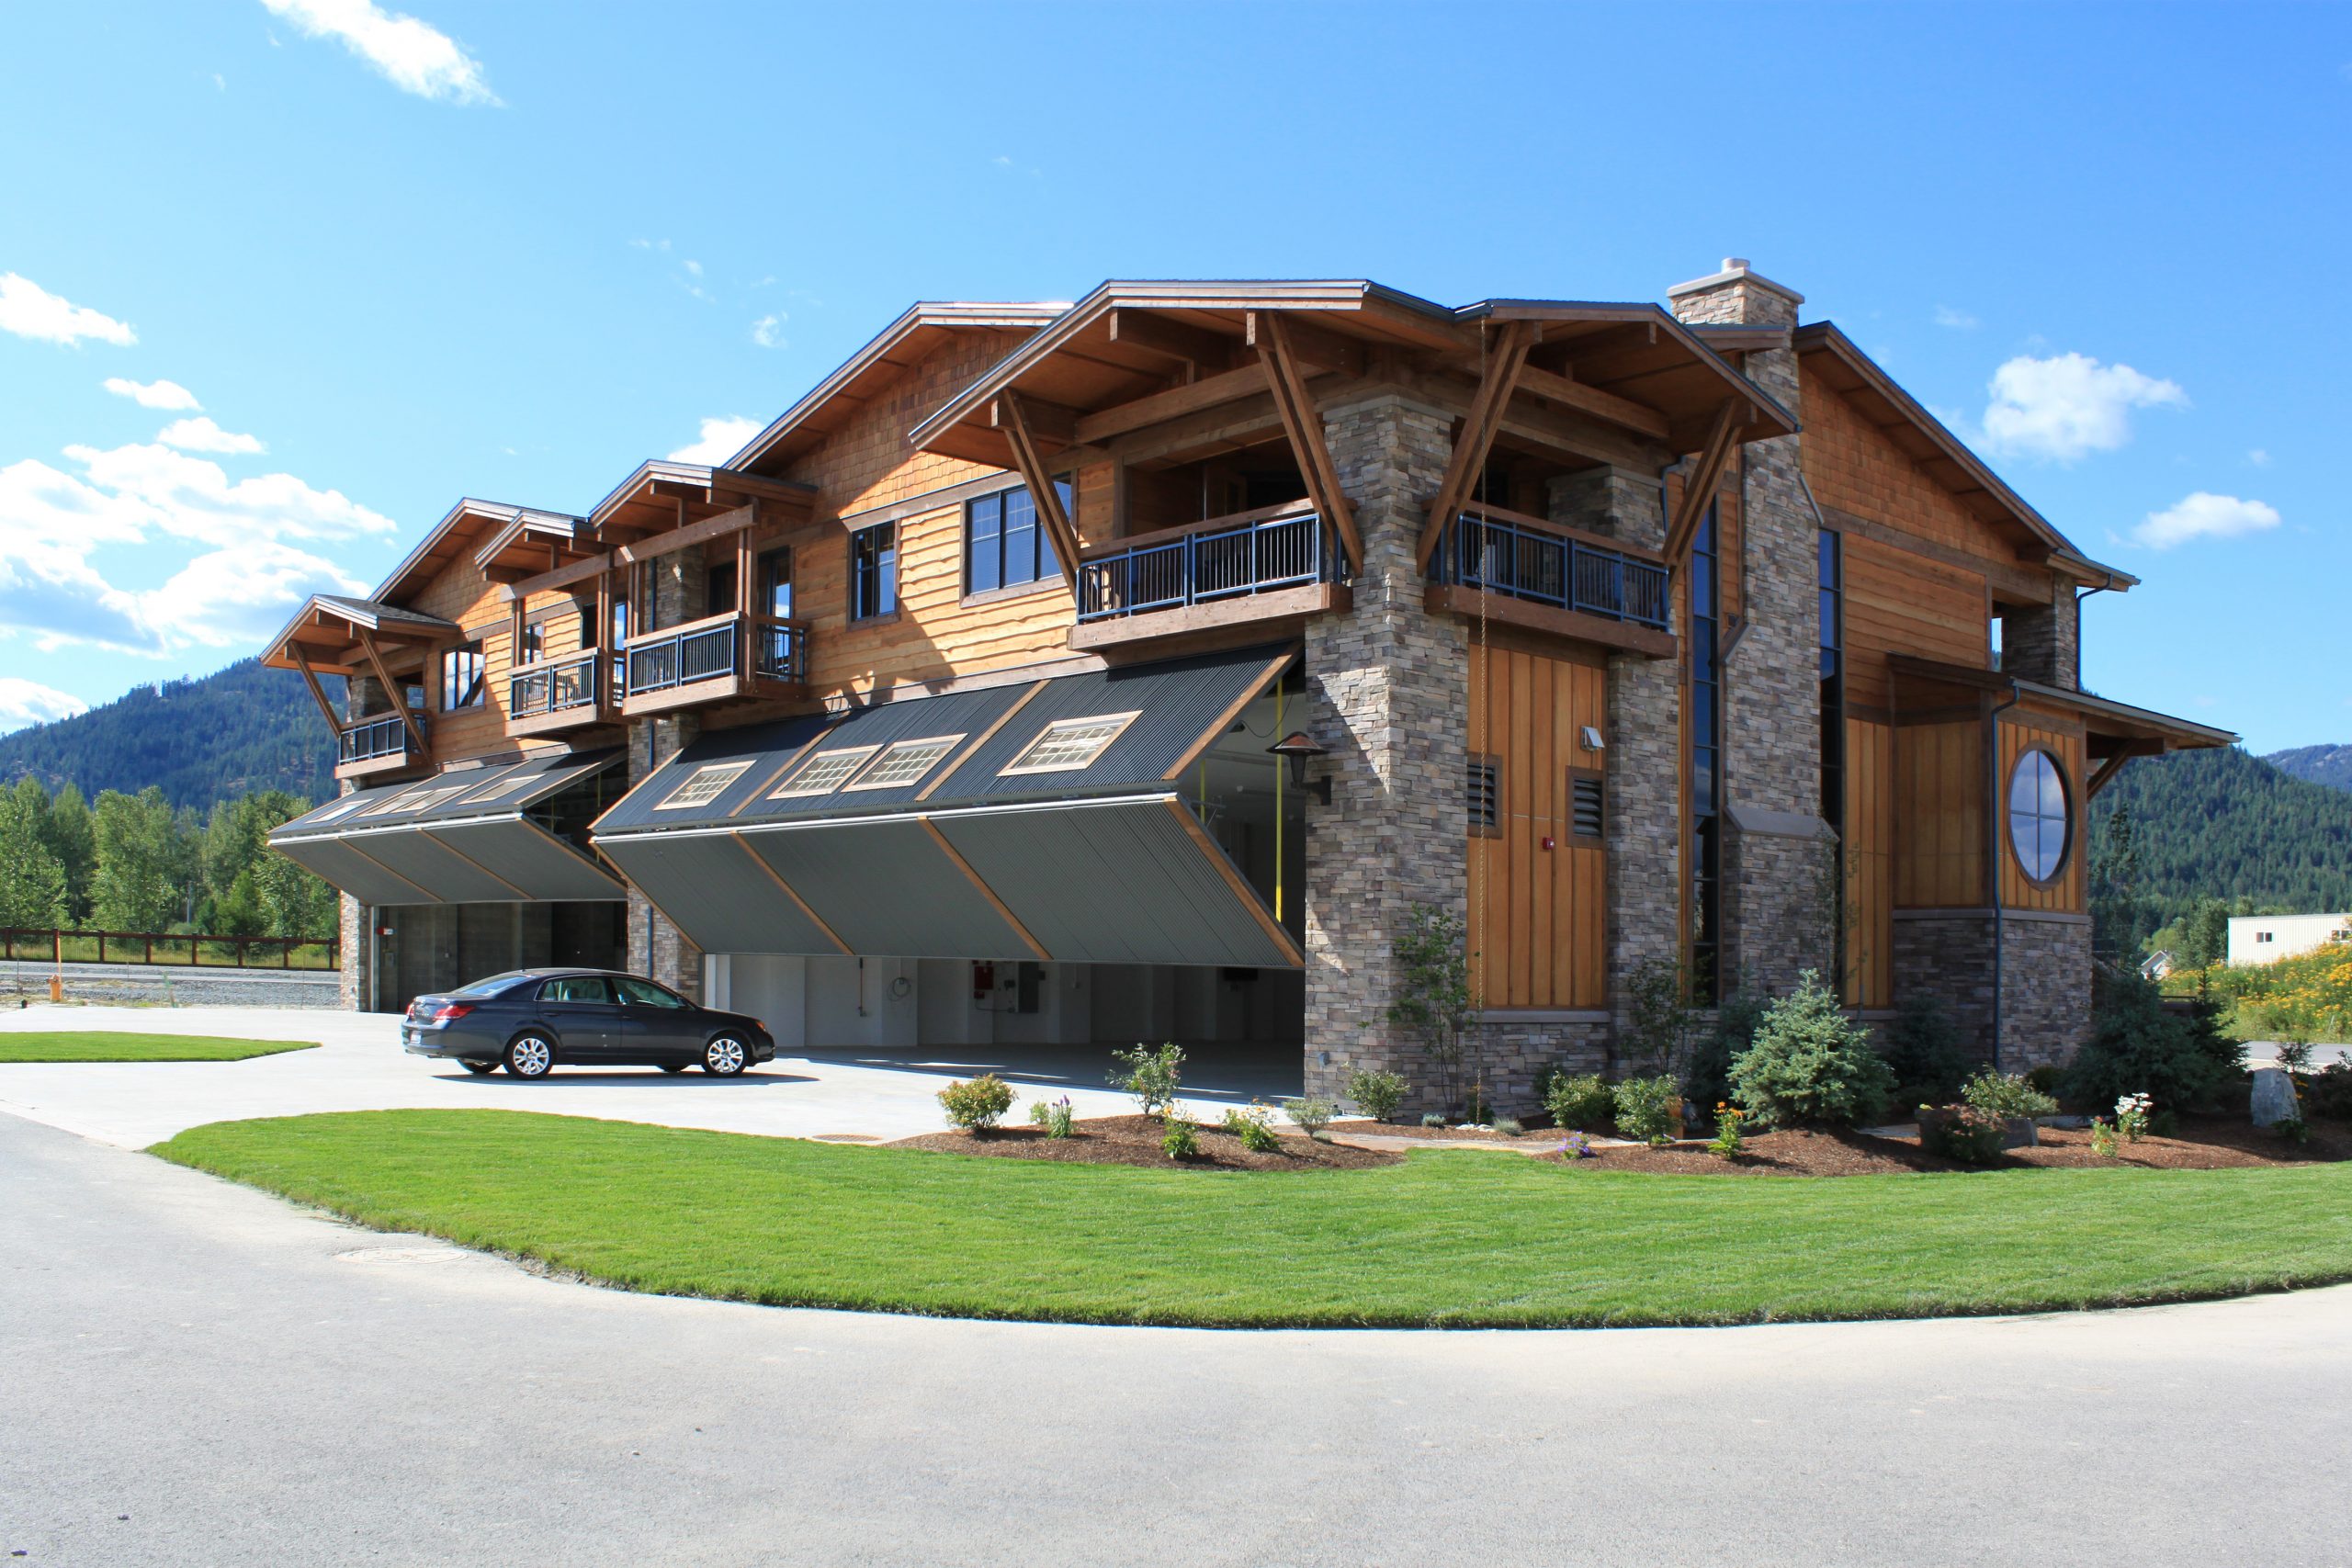 Silverwing is a custom duplex located at the public airport in Sandpoint, Idaho. The building features natural materials, and Northwest architectural detailing, such as, exposed timbers and stained cedar siding.